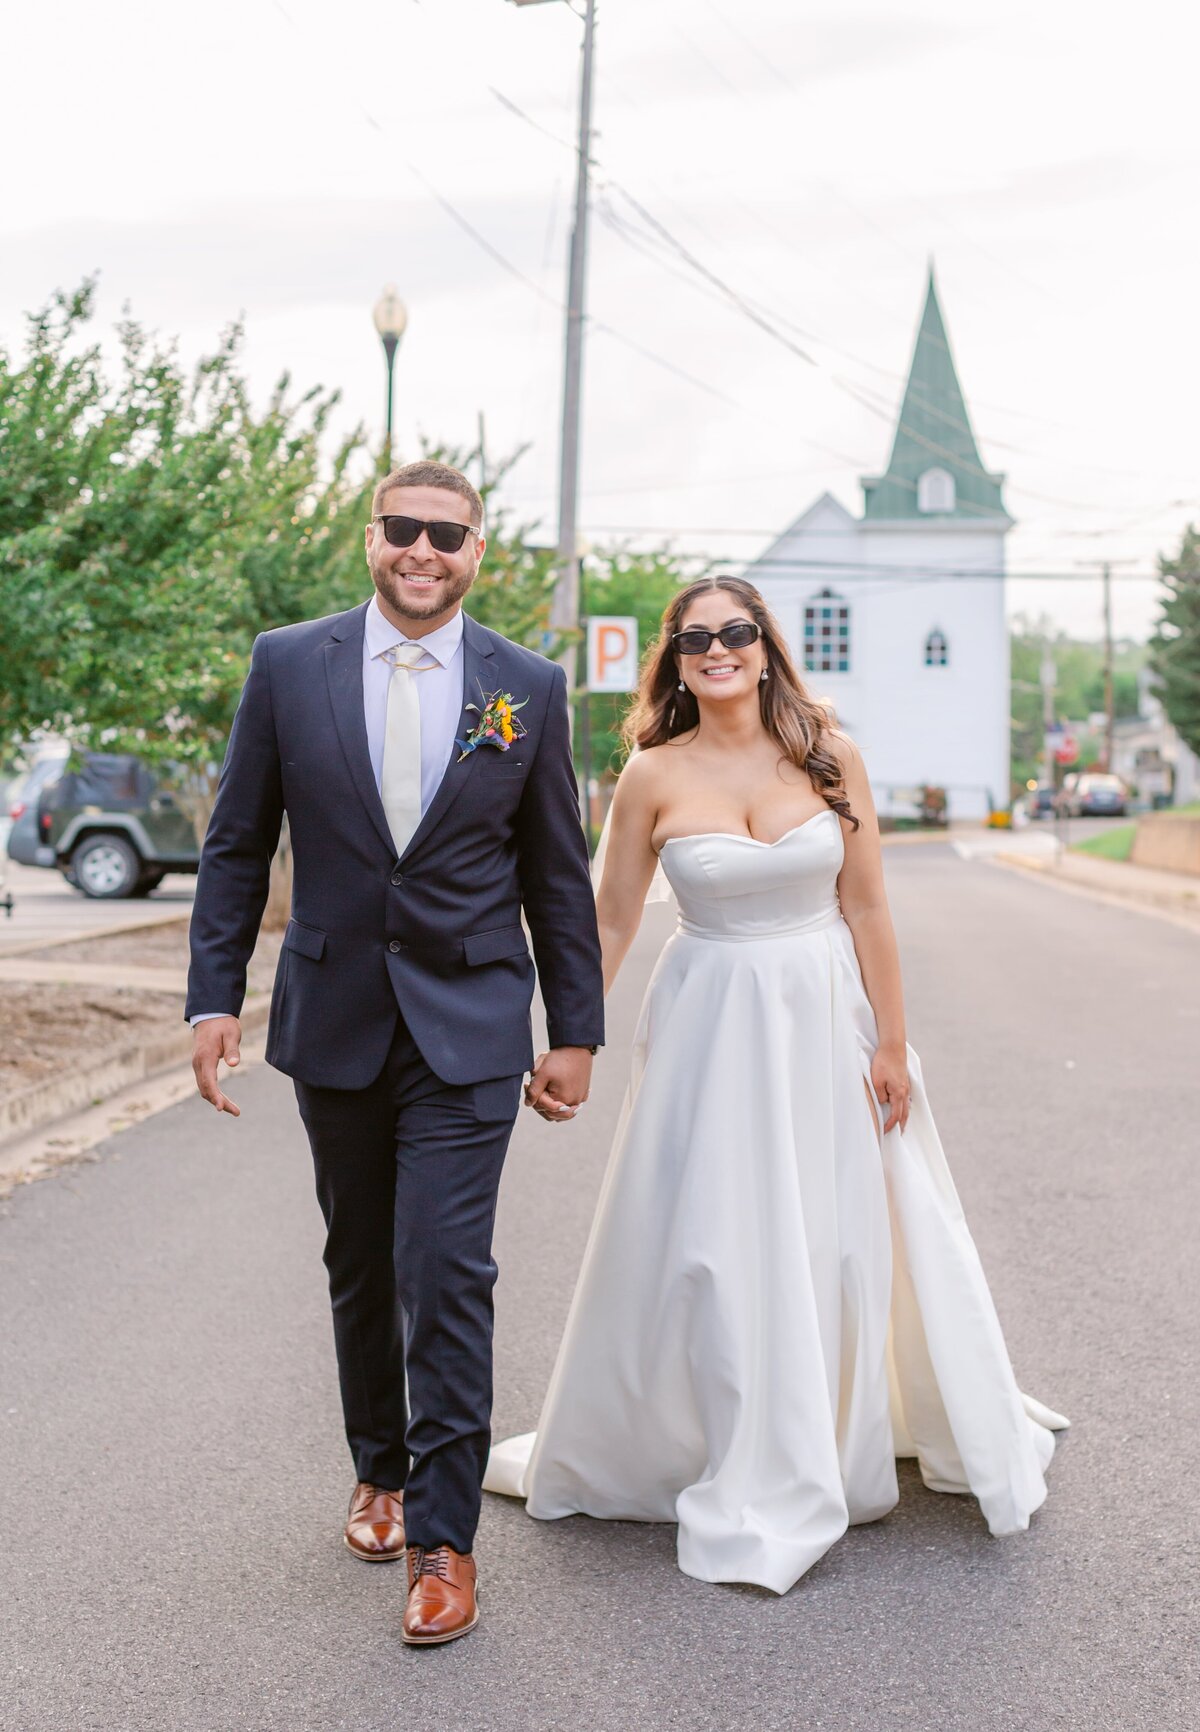 Bride and groom walking in the street by The Refinery at 120 in Culpeper, Virginia. Captured by Bethany Aubre Photography.